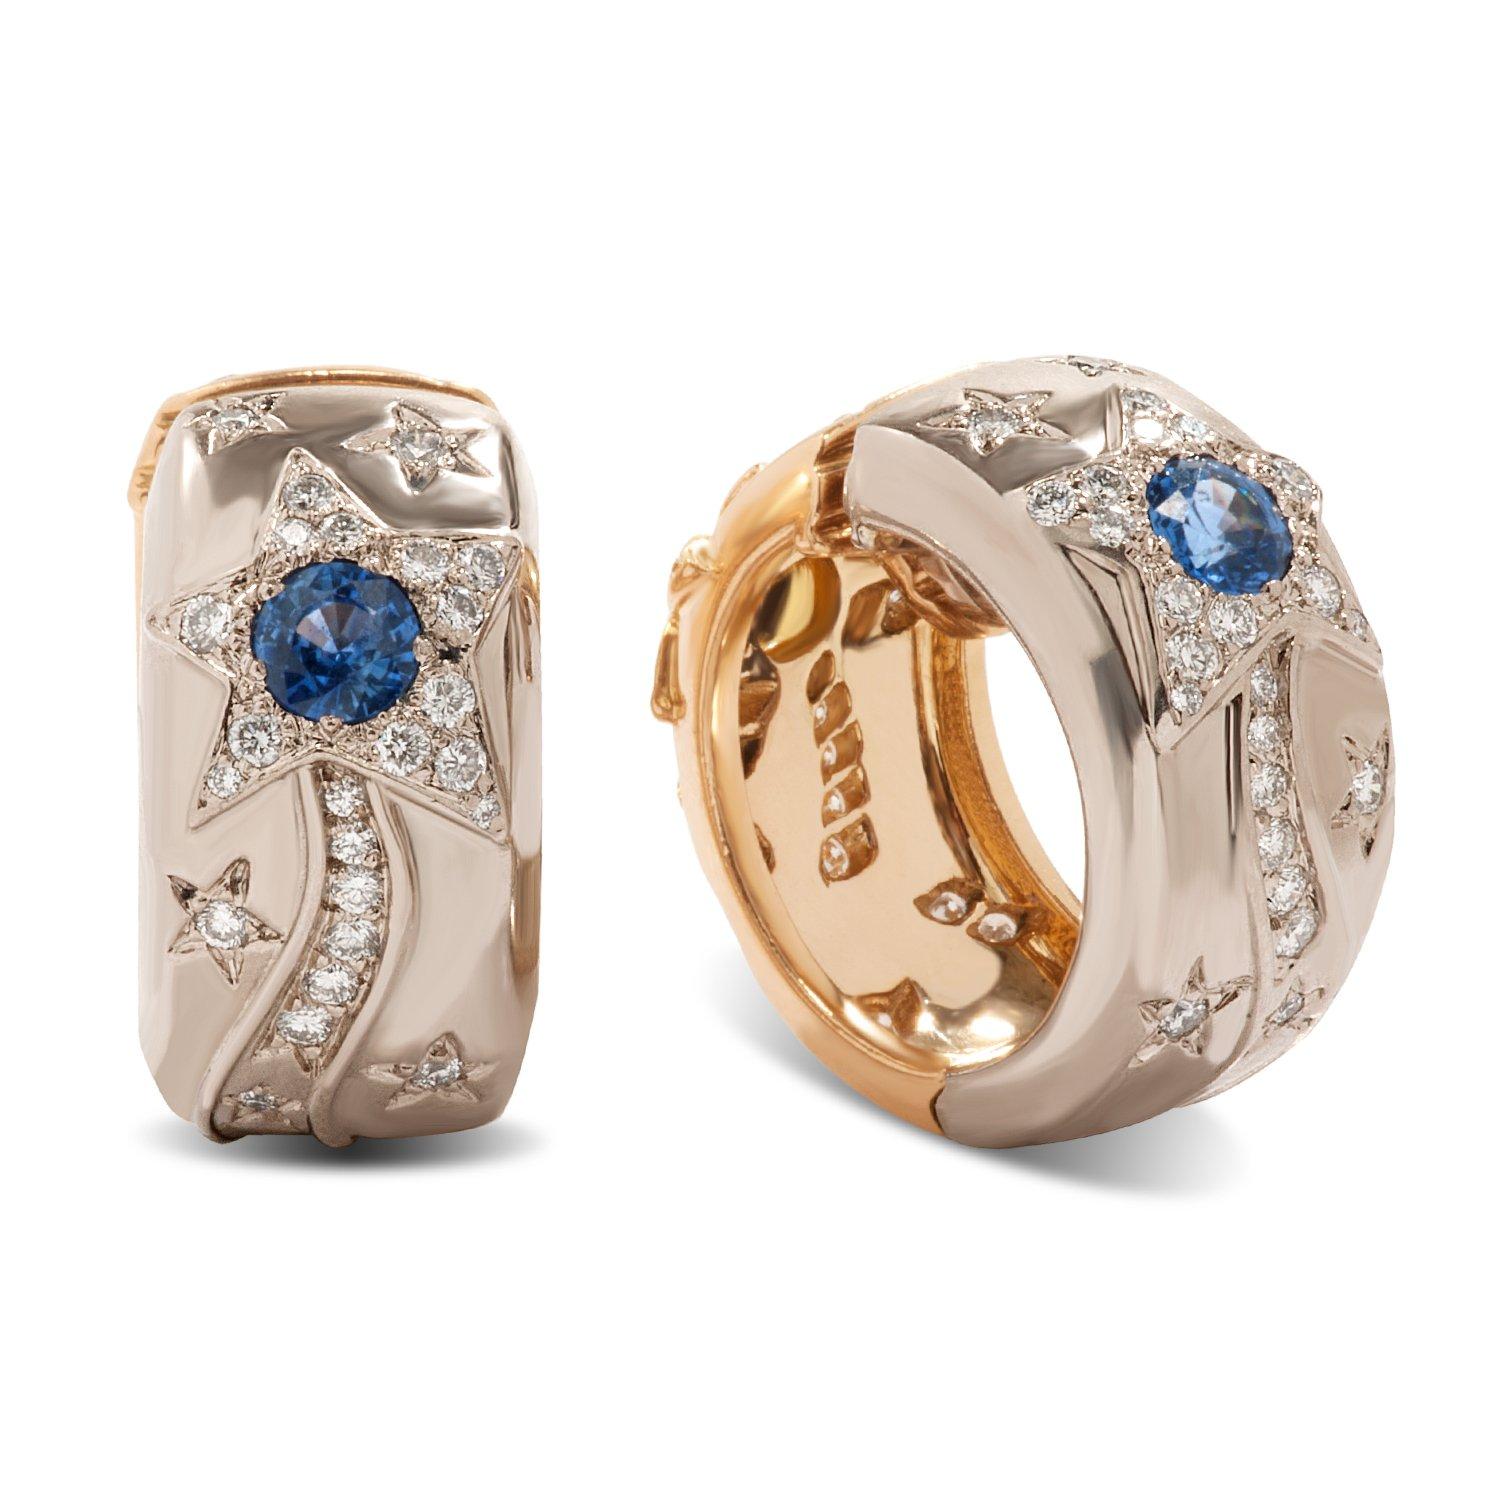 Chanel Comete reversible diamond, yellow sapphire and blue sapphire clip-on hoop earrings in 18k yellow gold and 18k white gold with French hallmarks.

These reversible earrings can be worn showing either yellow gold with diamonds and yellow